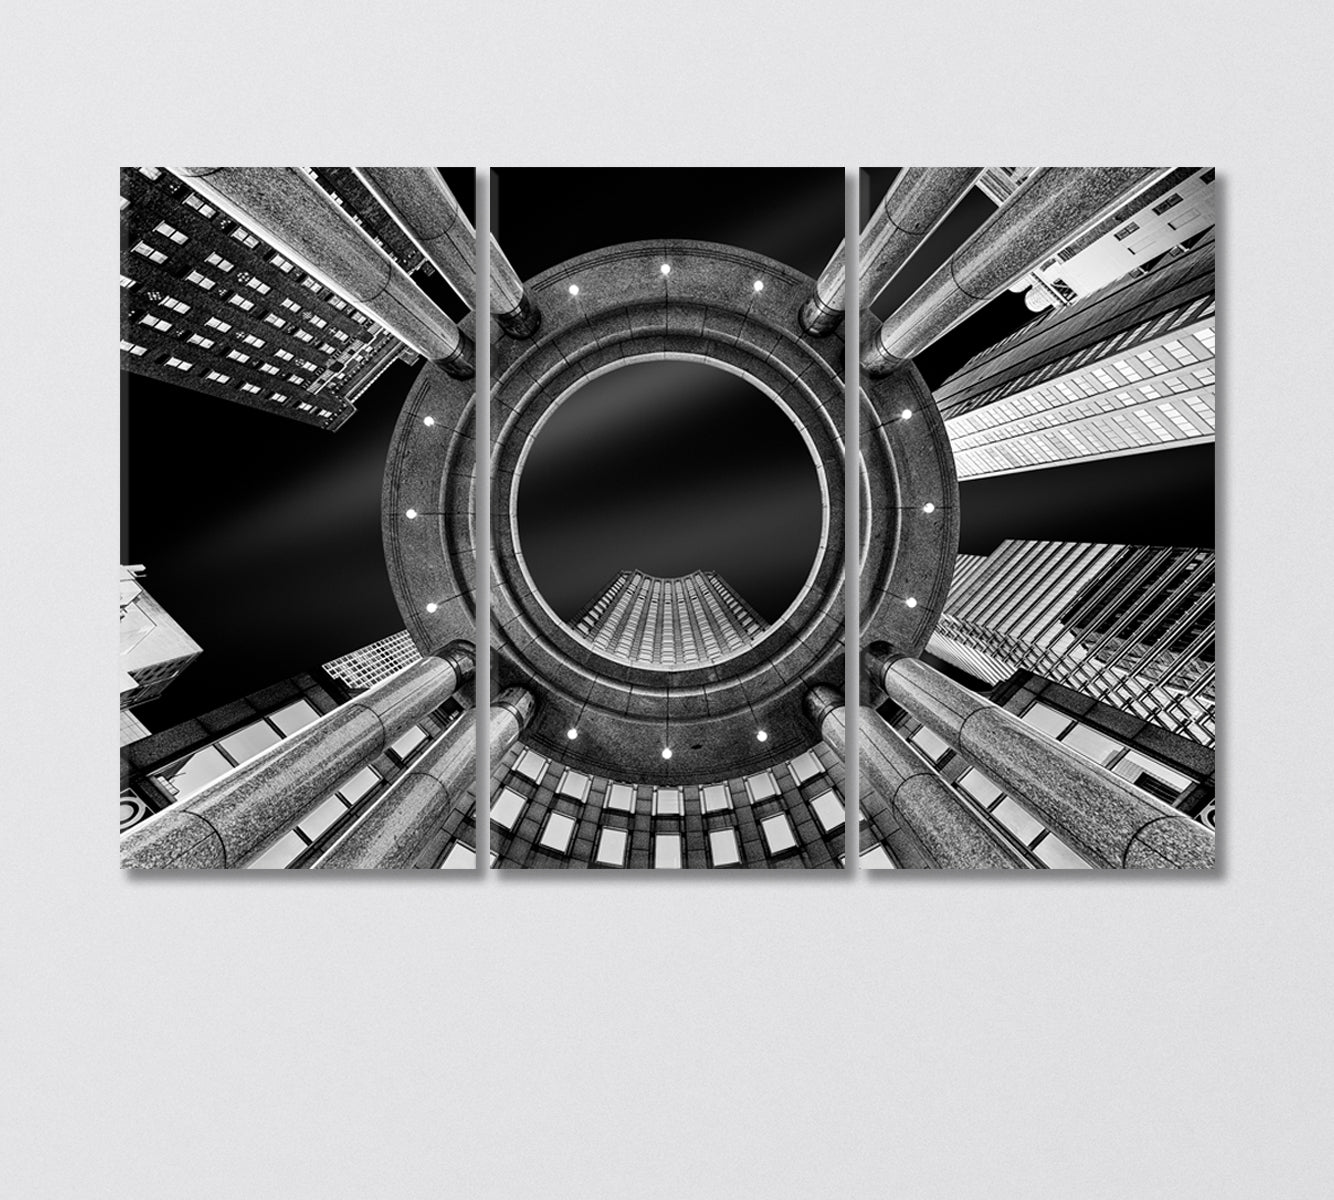 Bottom View of New York City Skyscrapers in Black White Canvas Print-Canvas Print-CetArt-3 Panels-36x24 inches-CetArt